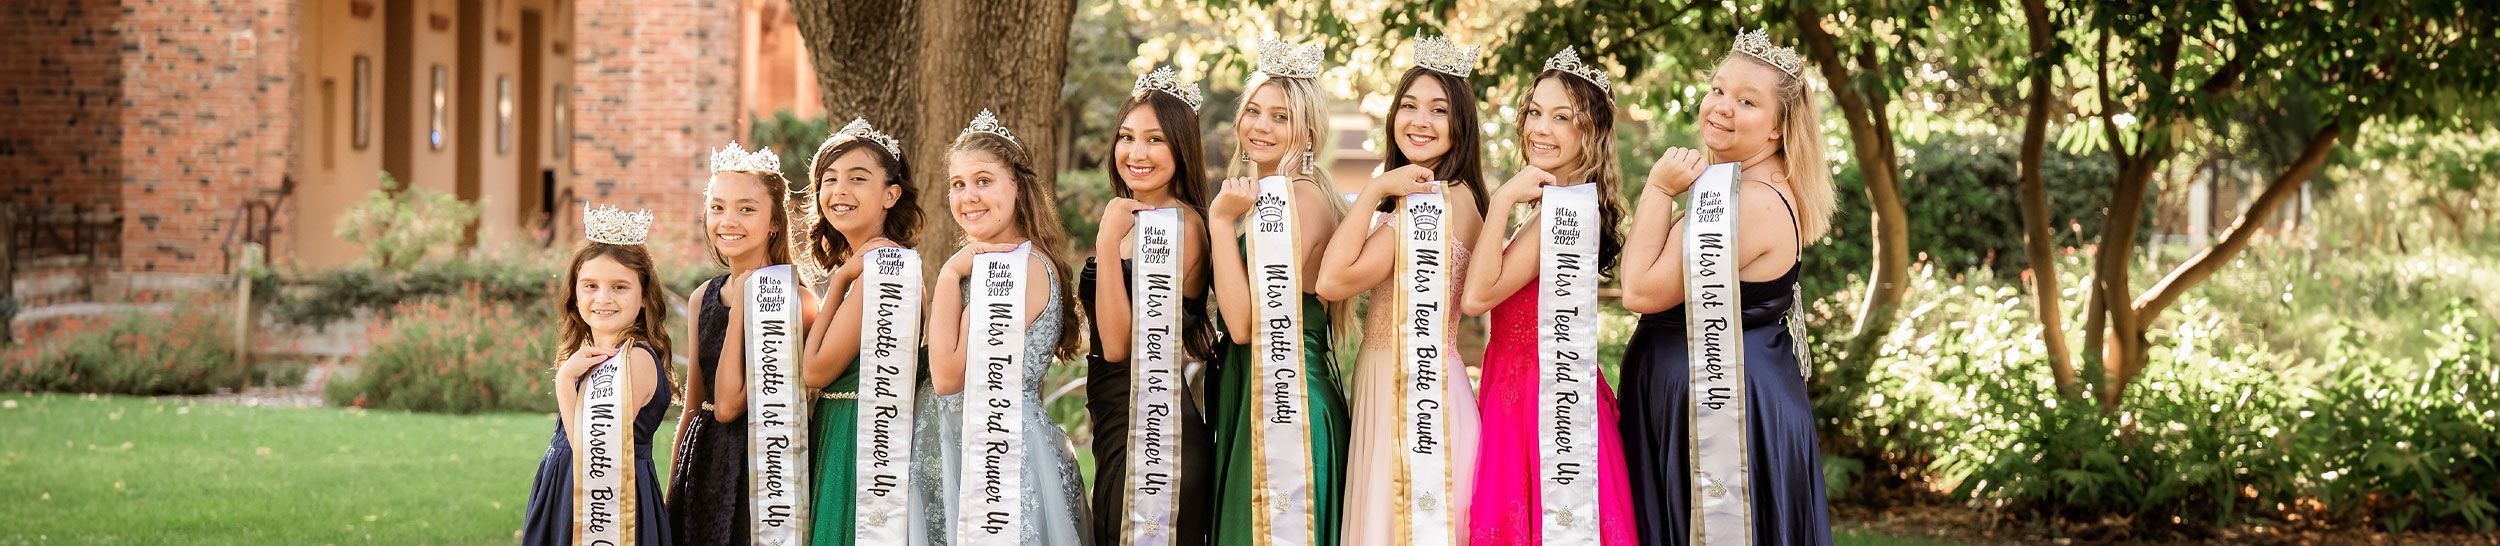 Miss Butte County Court